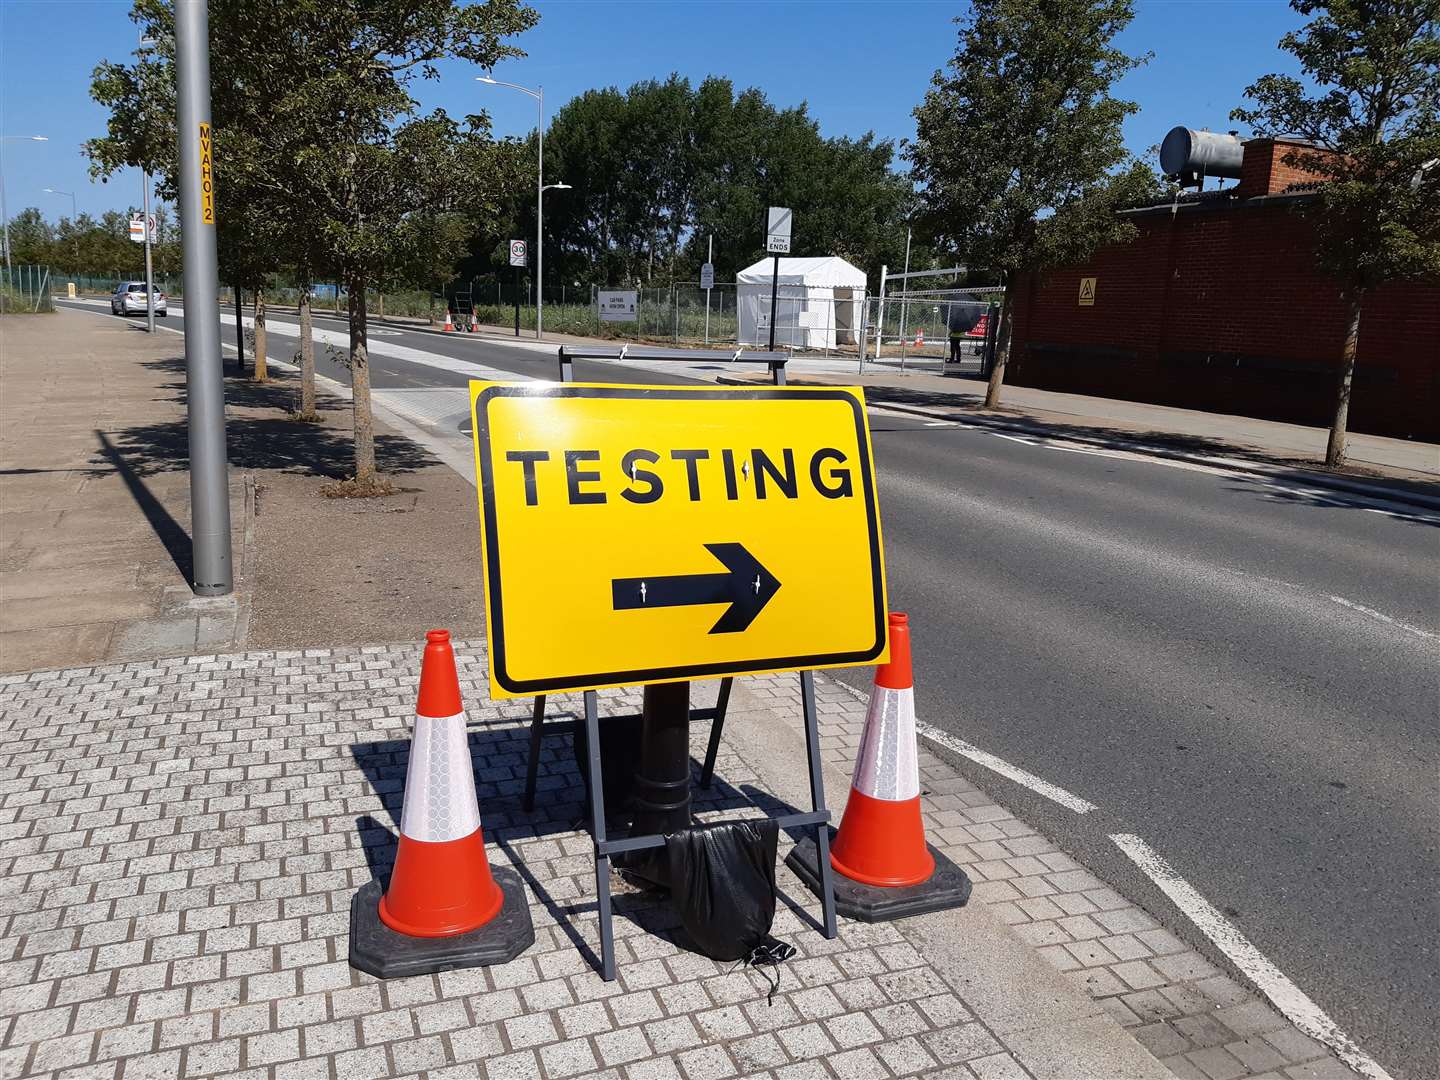 Due to Ashford's high statistics, a test site will remain in the town until Christmas